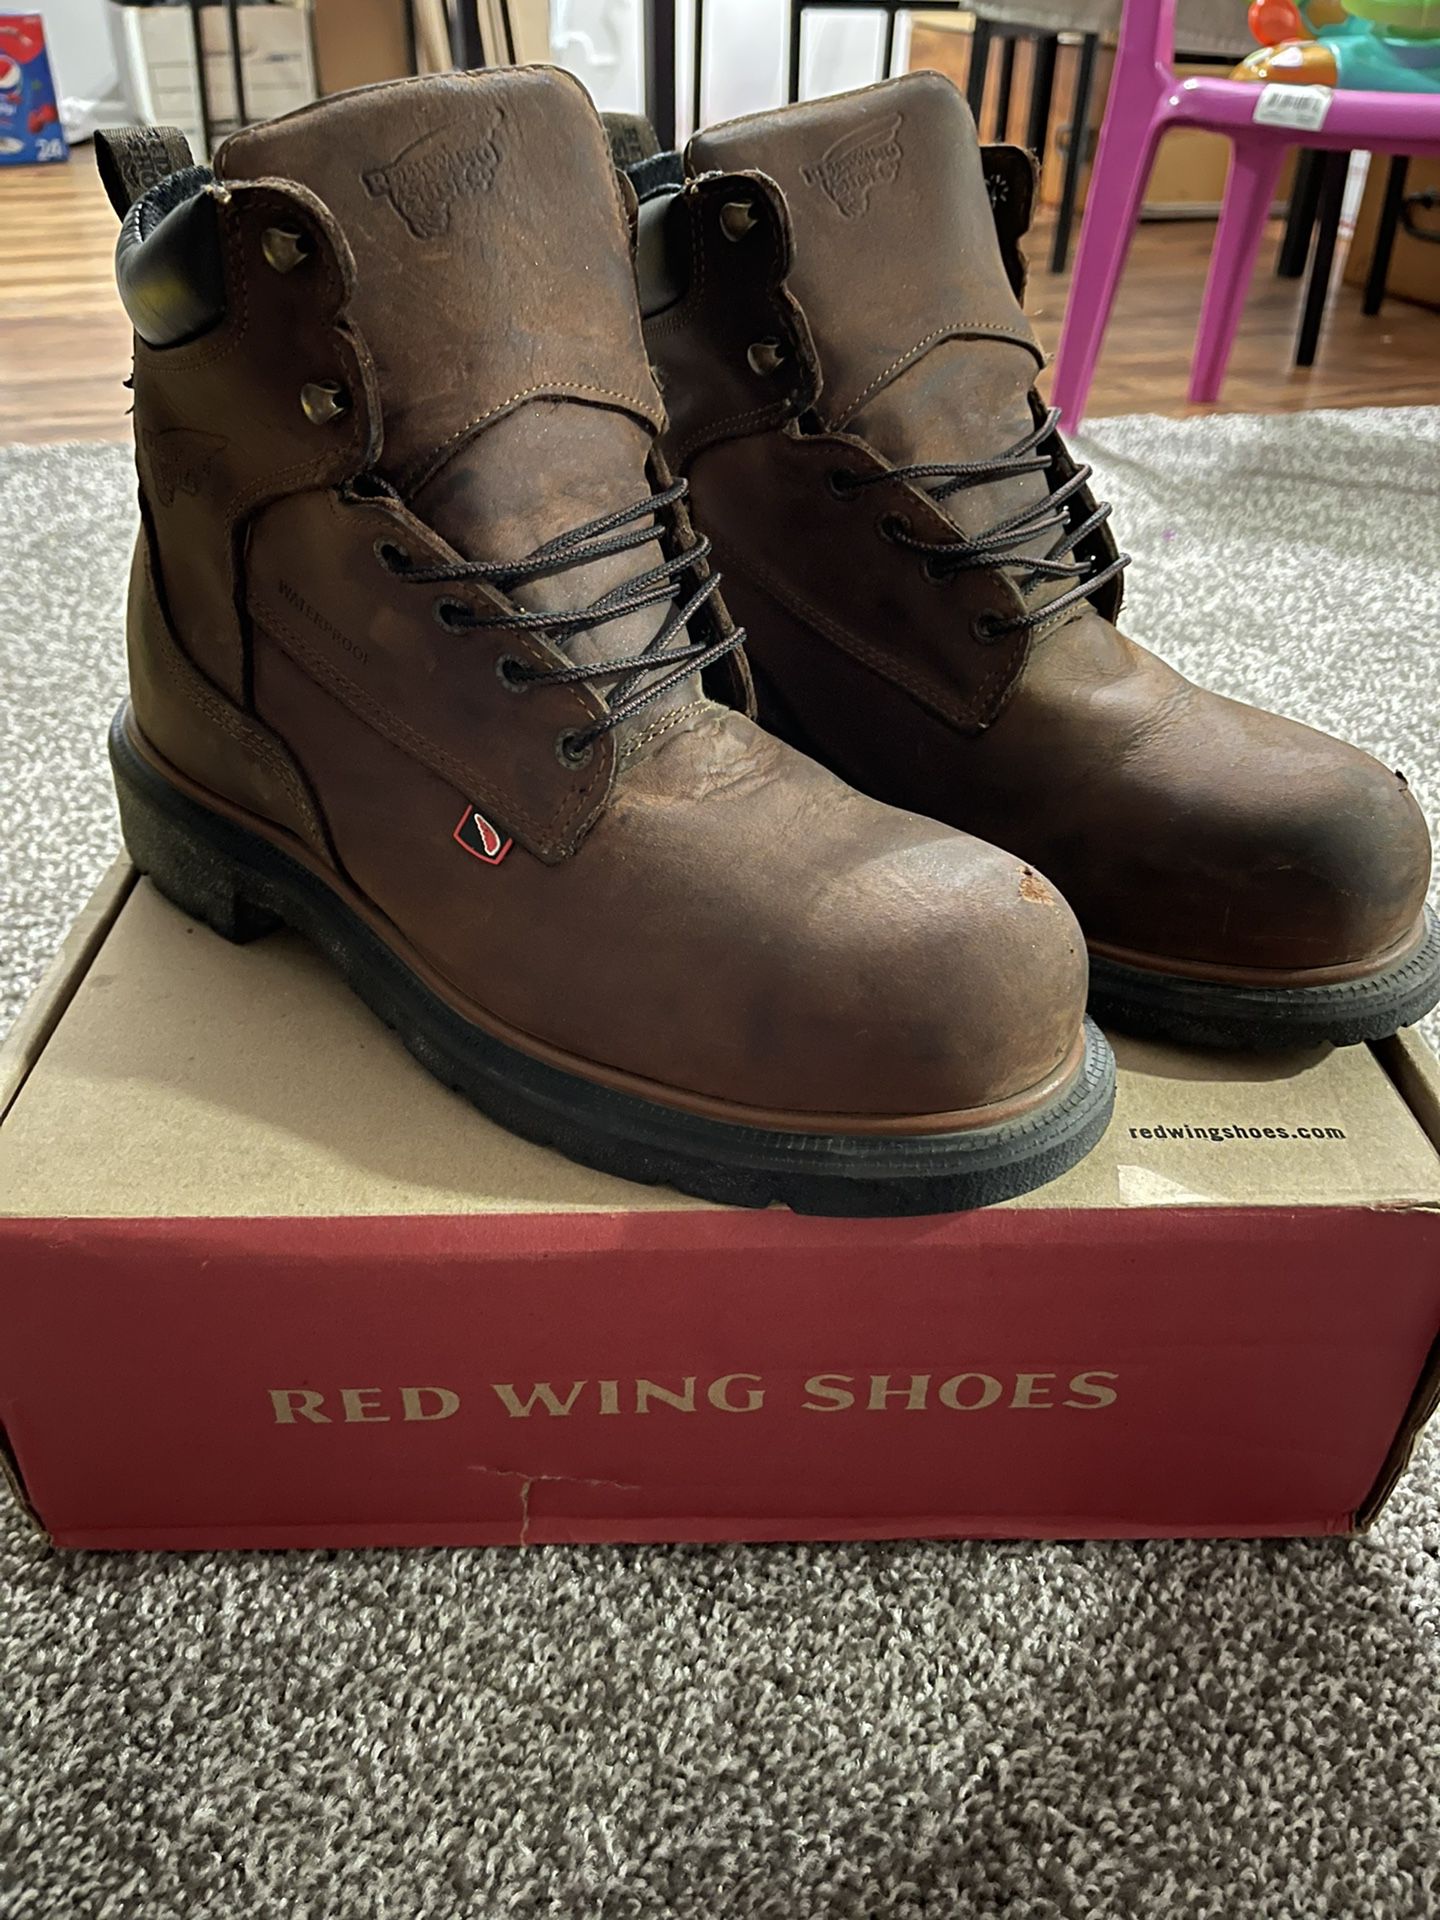 Red wing boots 8.5